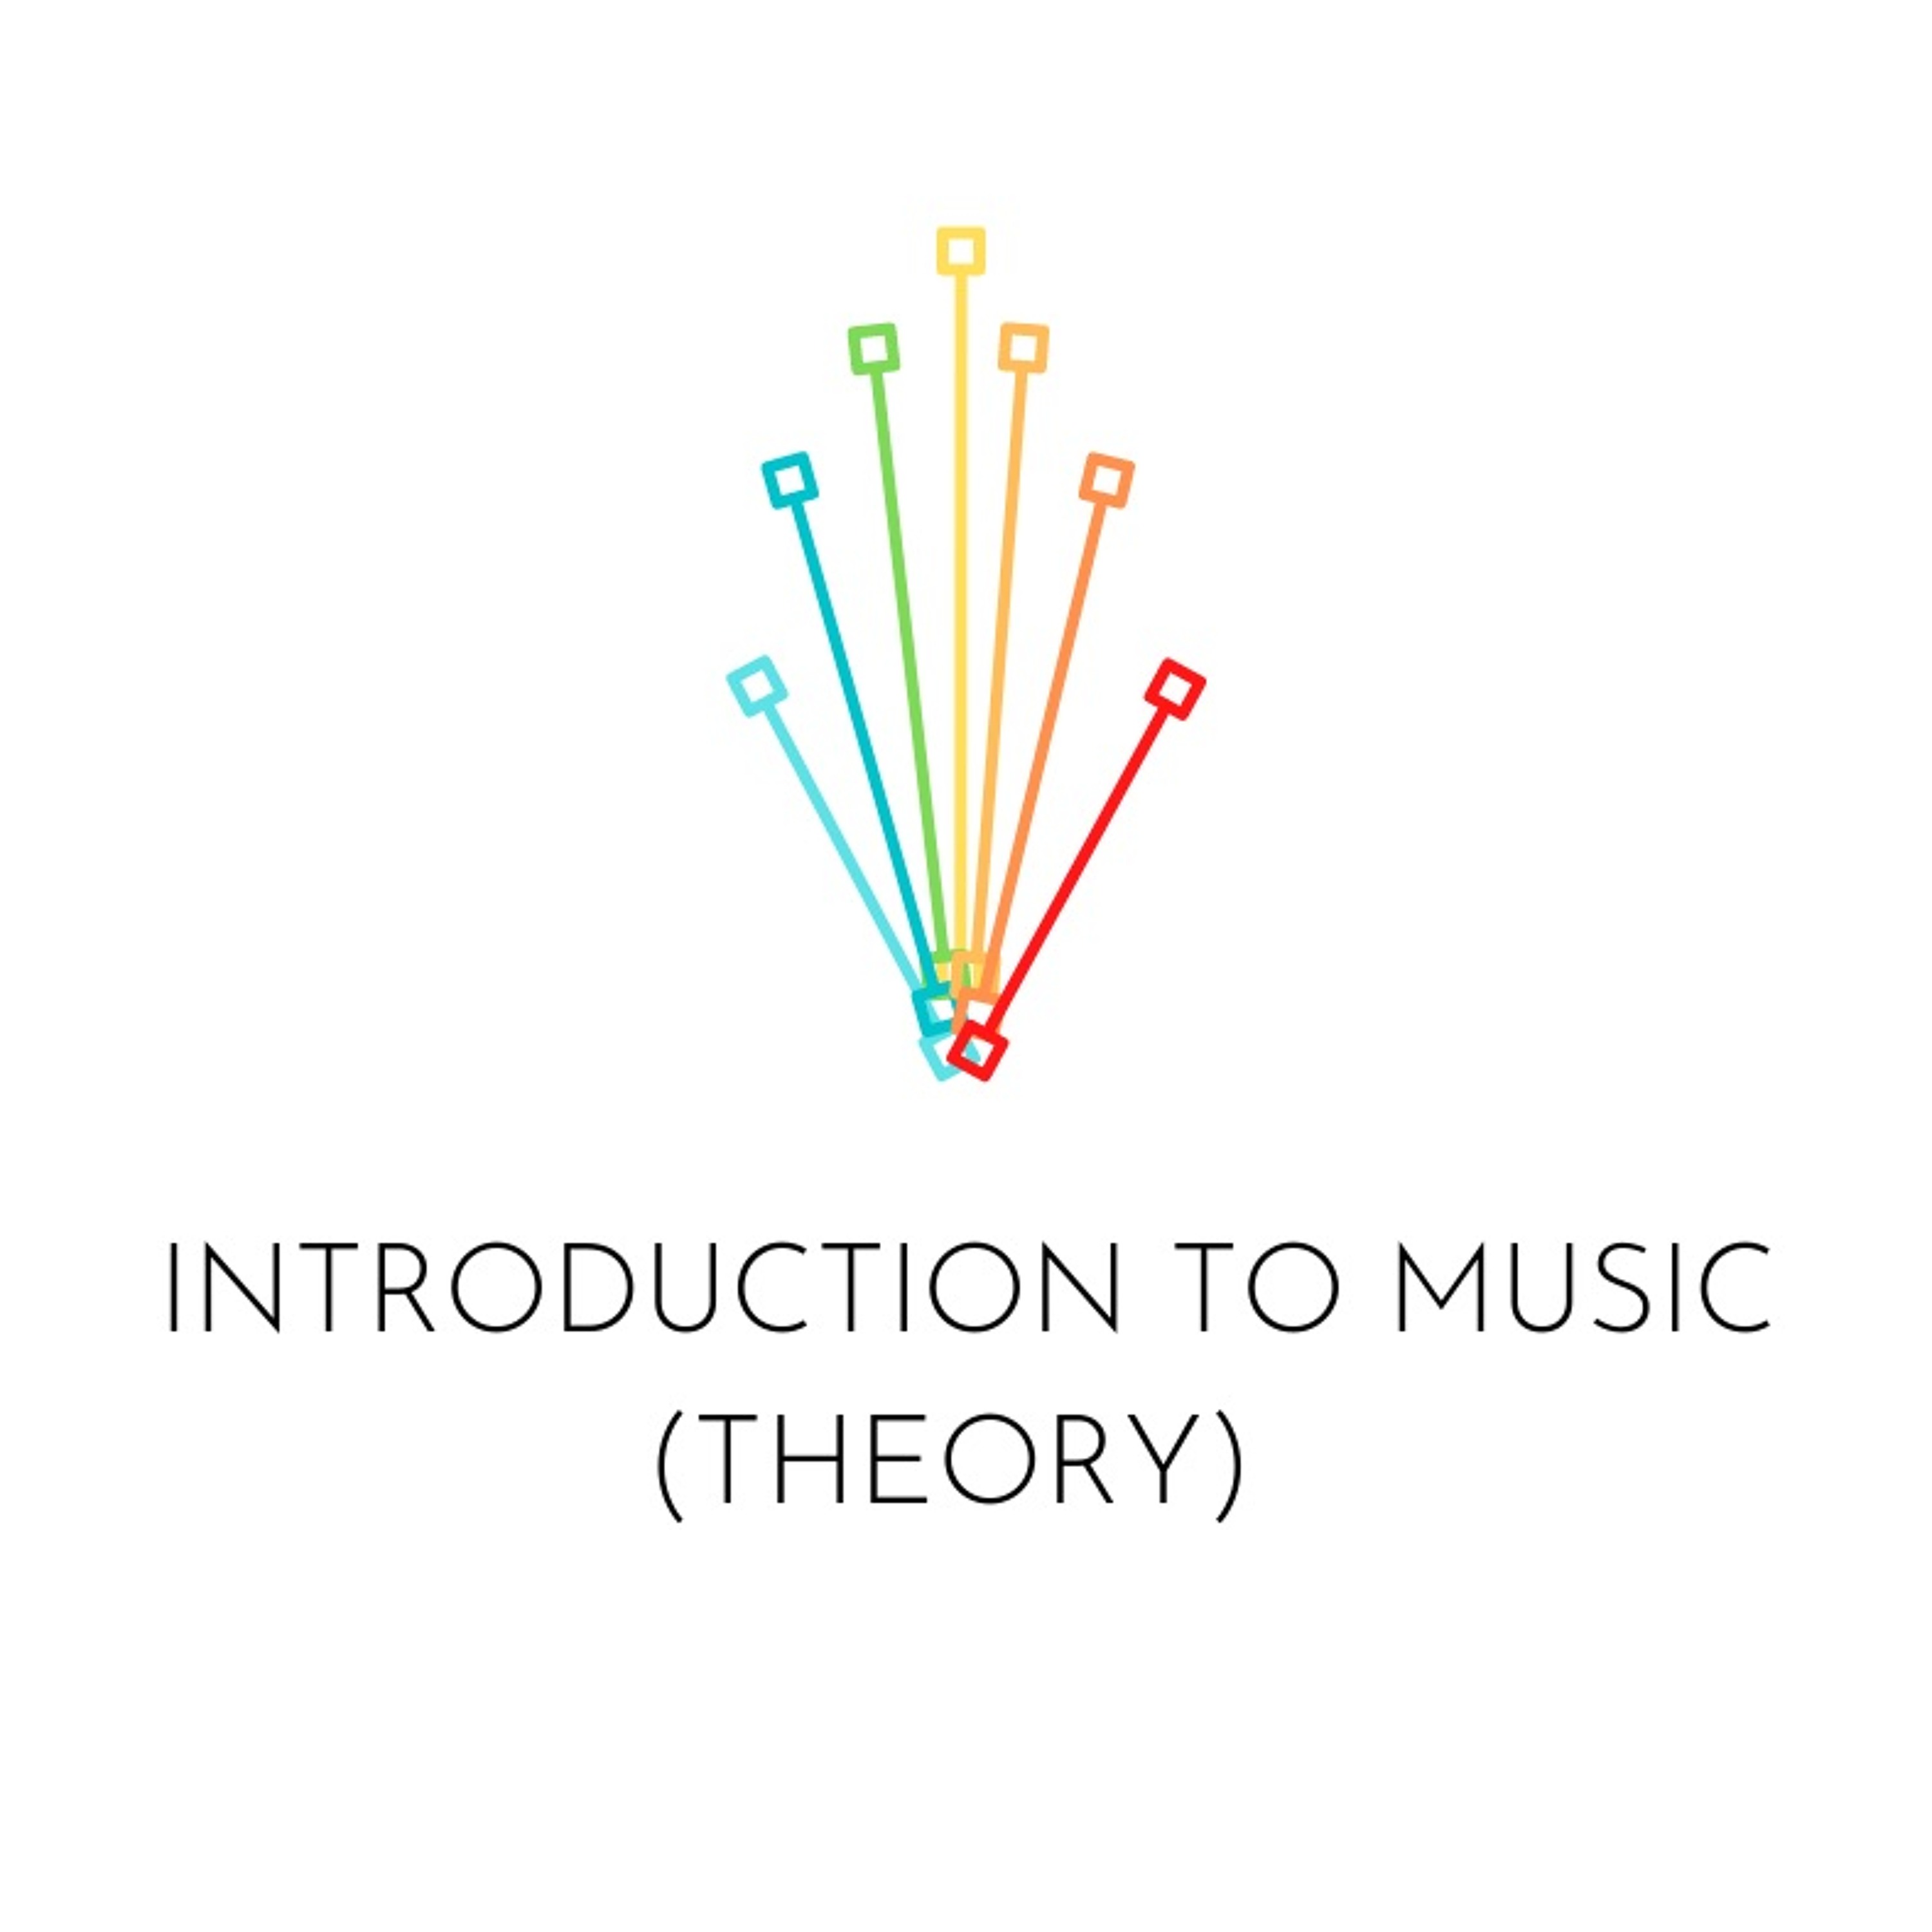 Introduction to Music (Theory), Track 20 - Language Transfer & The Thinking Method